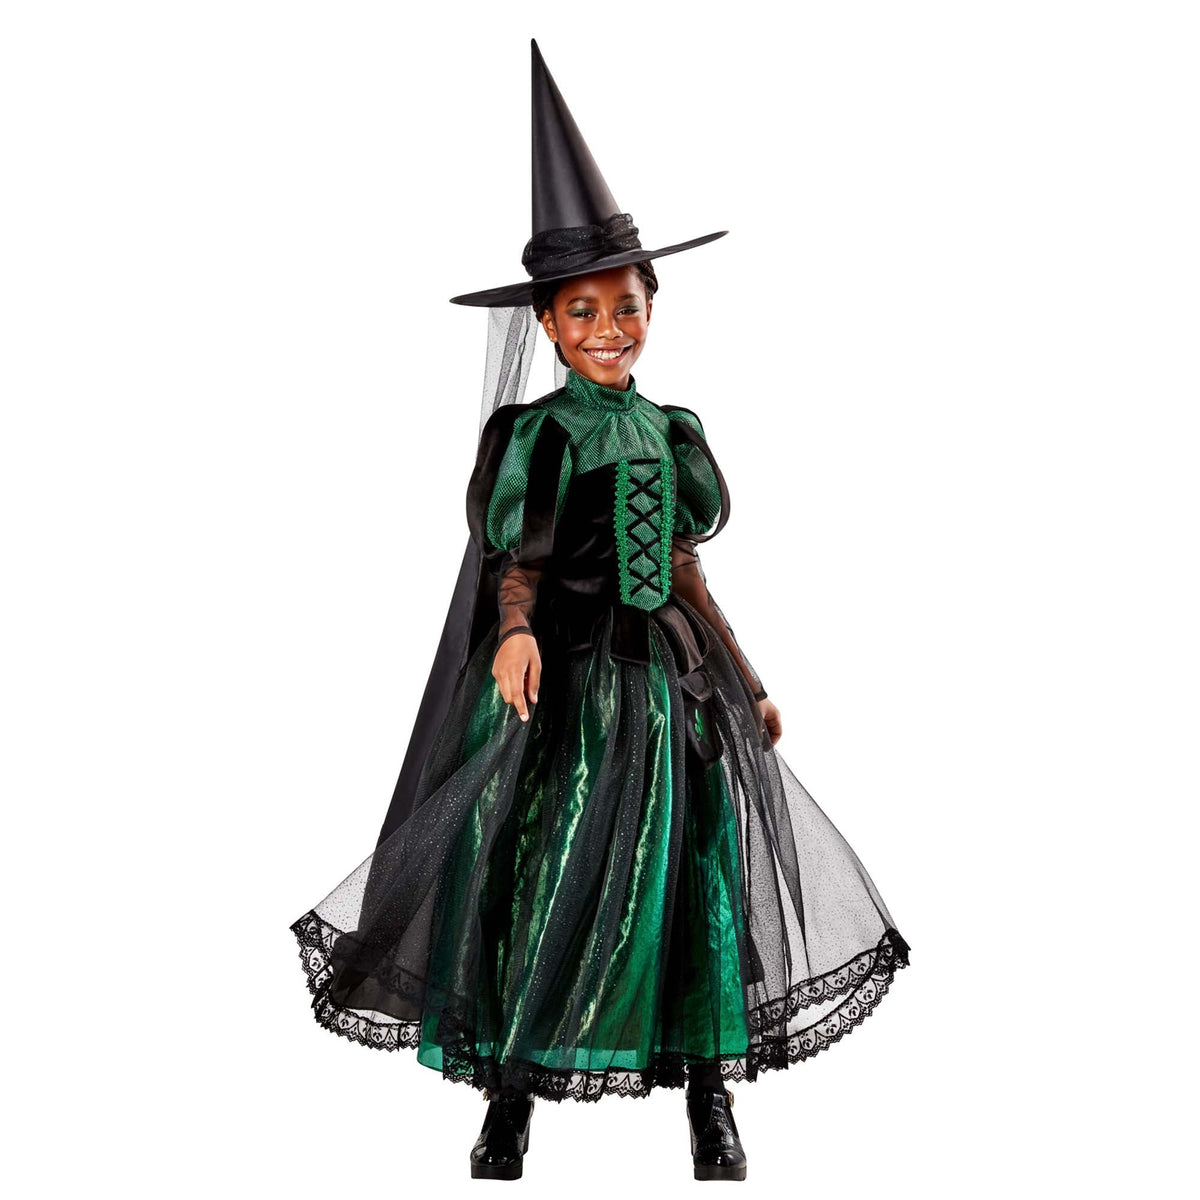 RUBIES II (Ruby Slipper Sales) Costumes Wicked Elphaba Deluxe Costume for Kids, Black and Green Dress